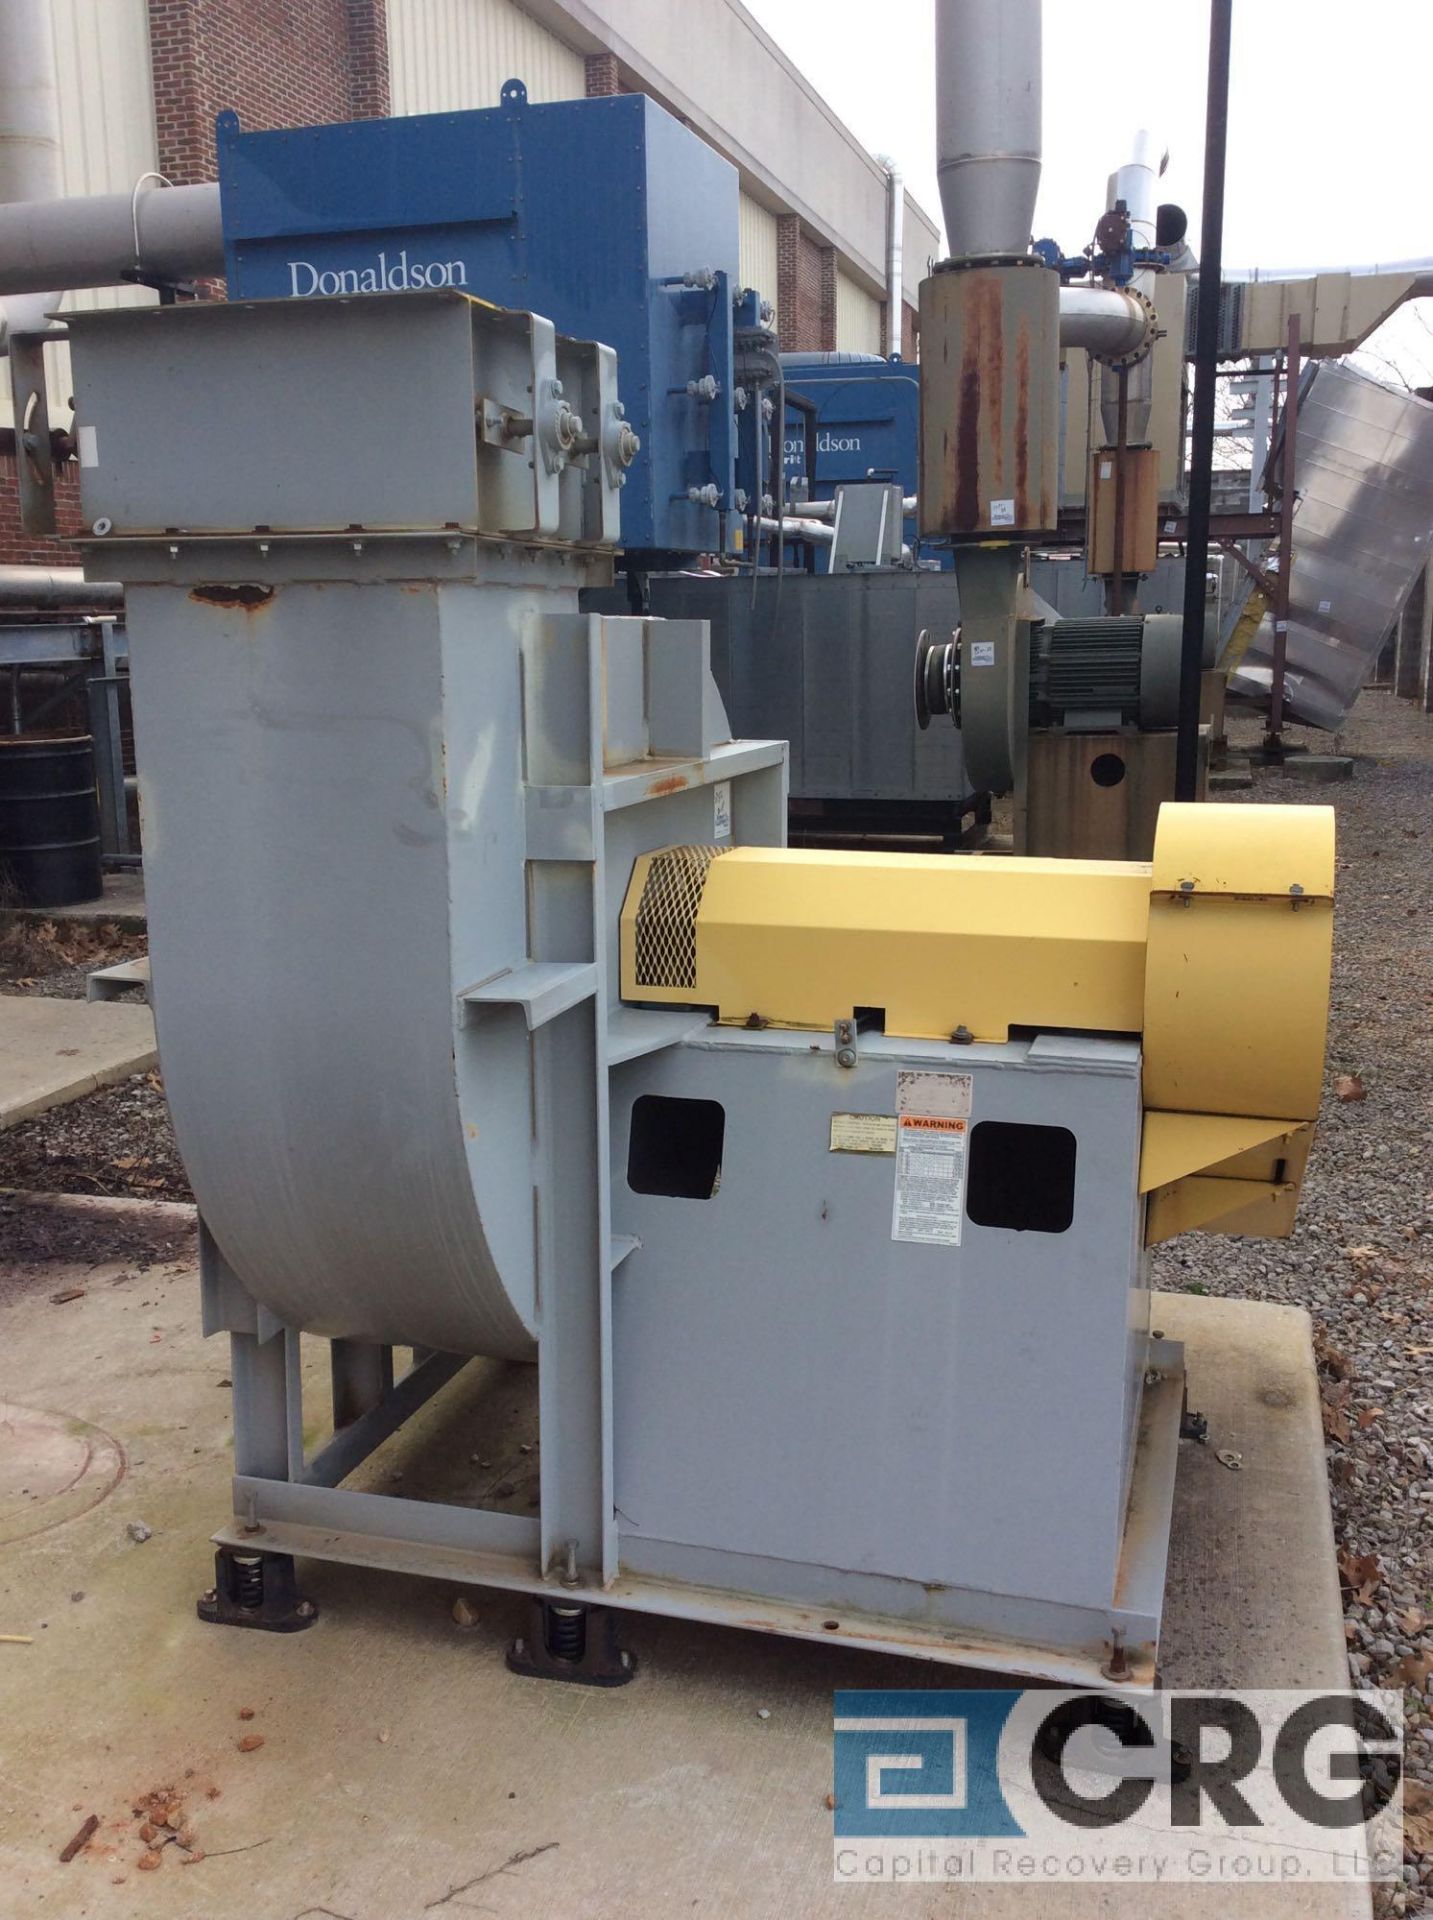 Donaldson Torit DF03-24 dust collector, with Aerovent blower 60 hp motor both are 3 phase